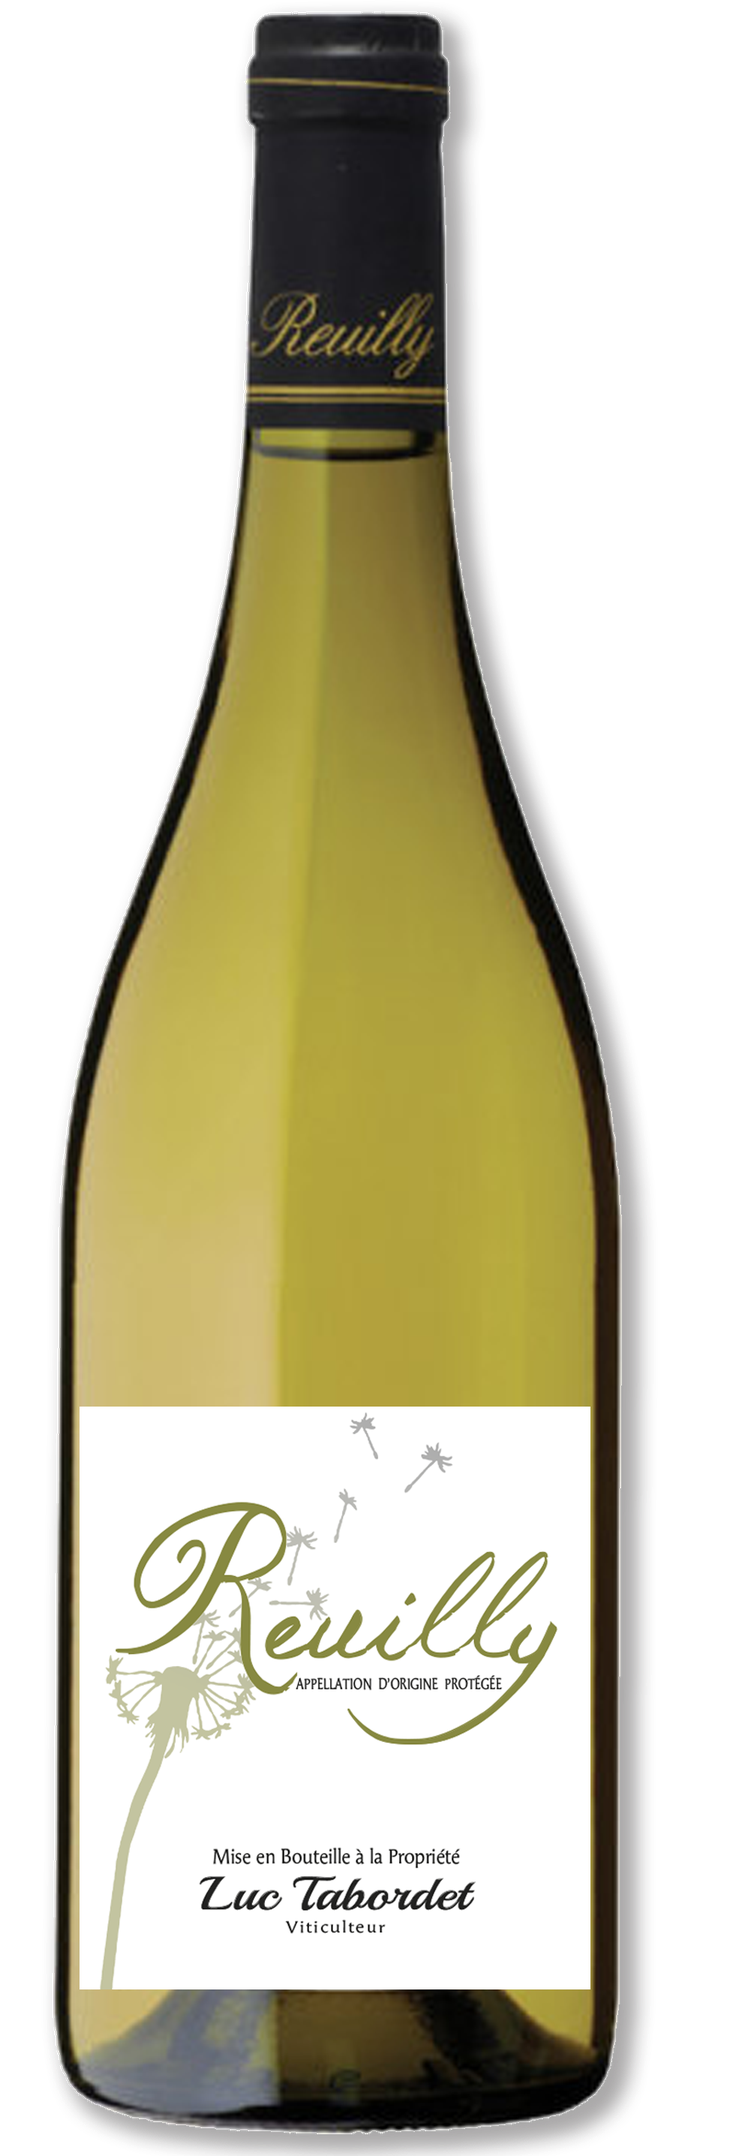 Domaine Luc Tabordet, Reuilly, Agriculture Biologique, 2018